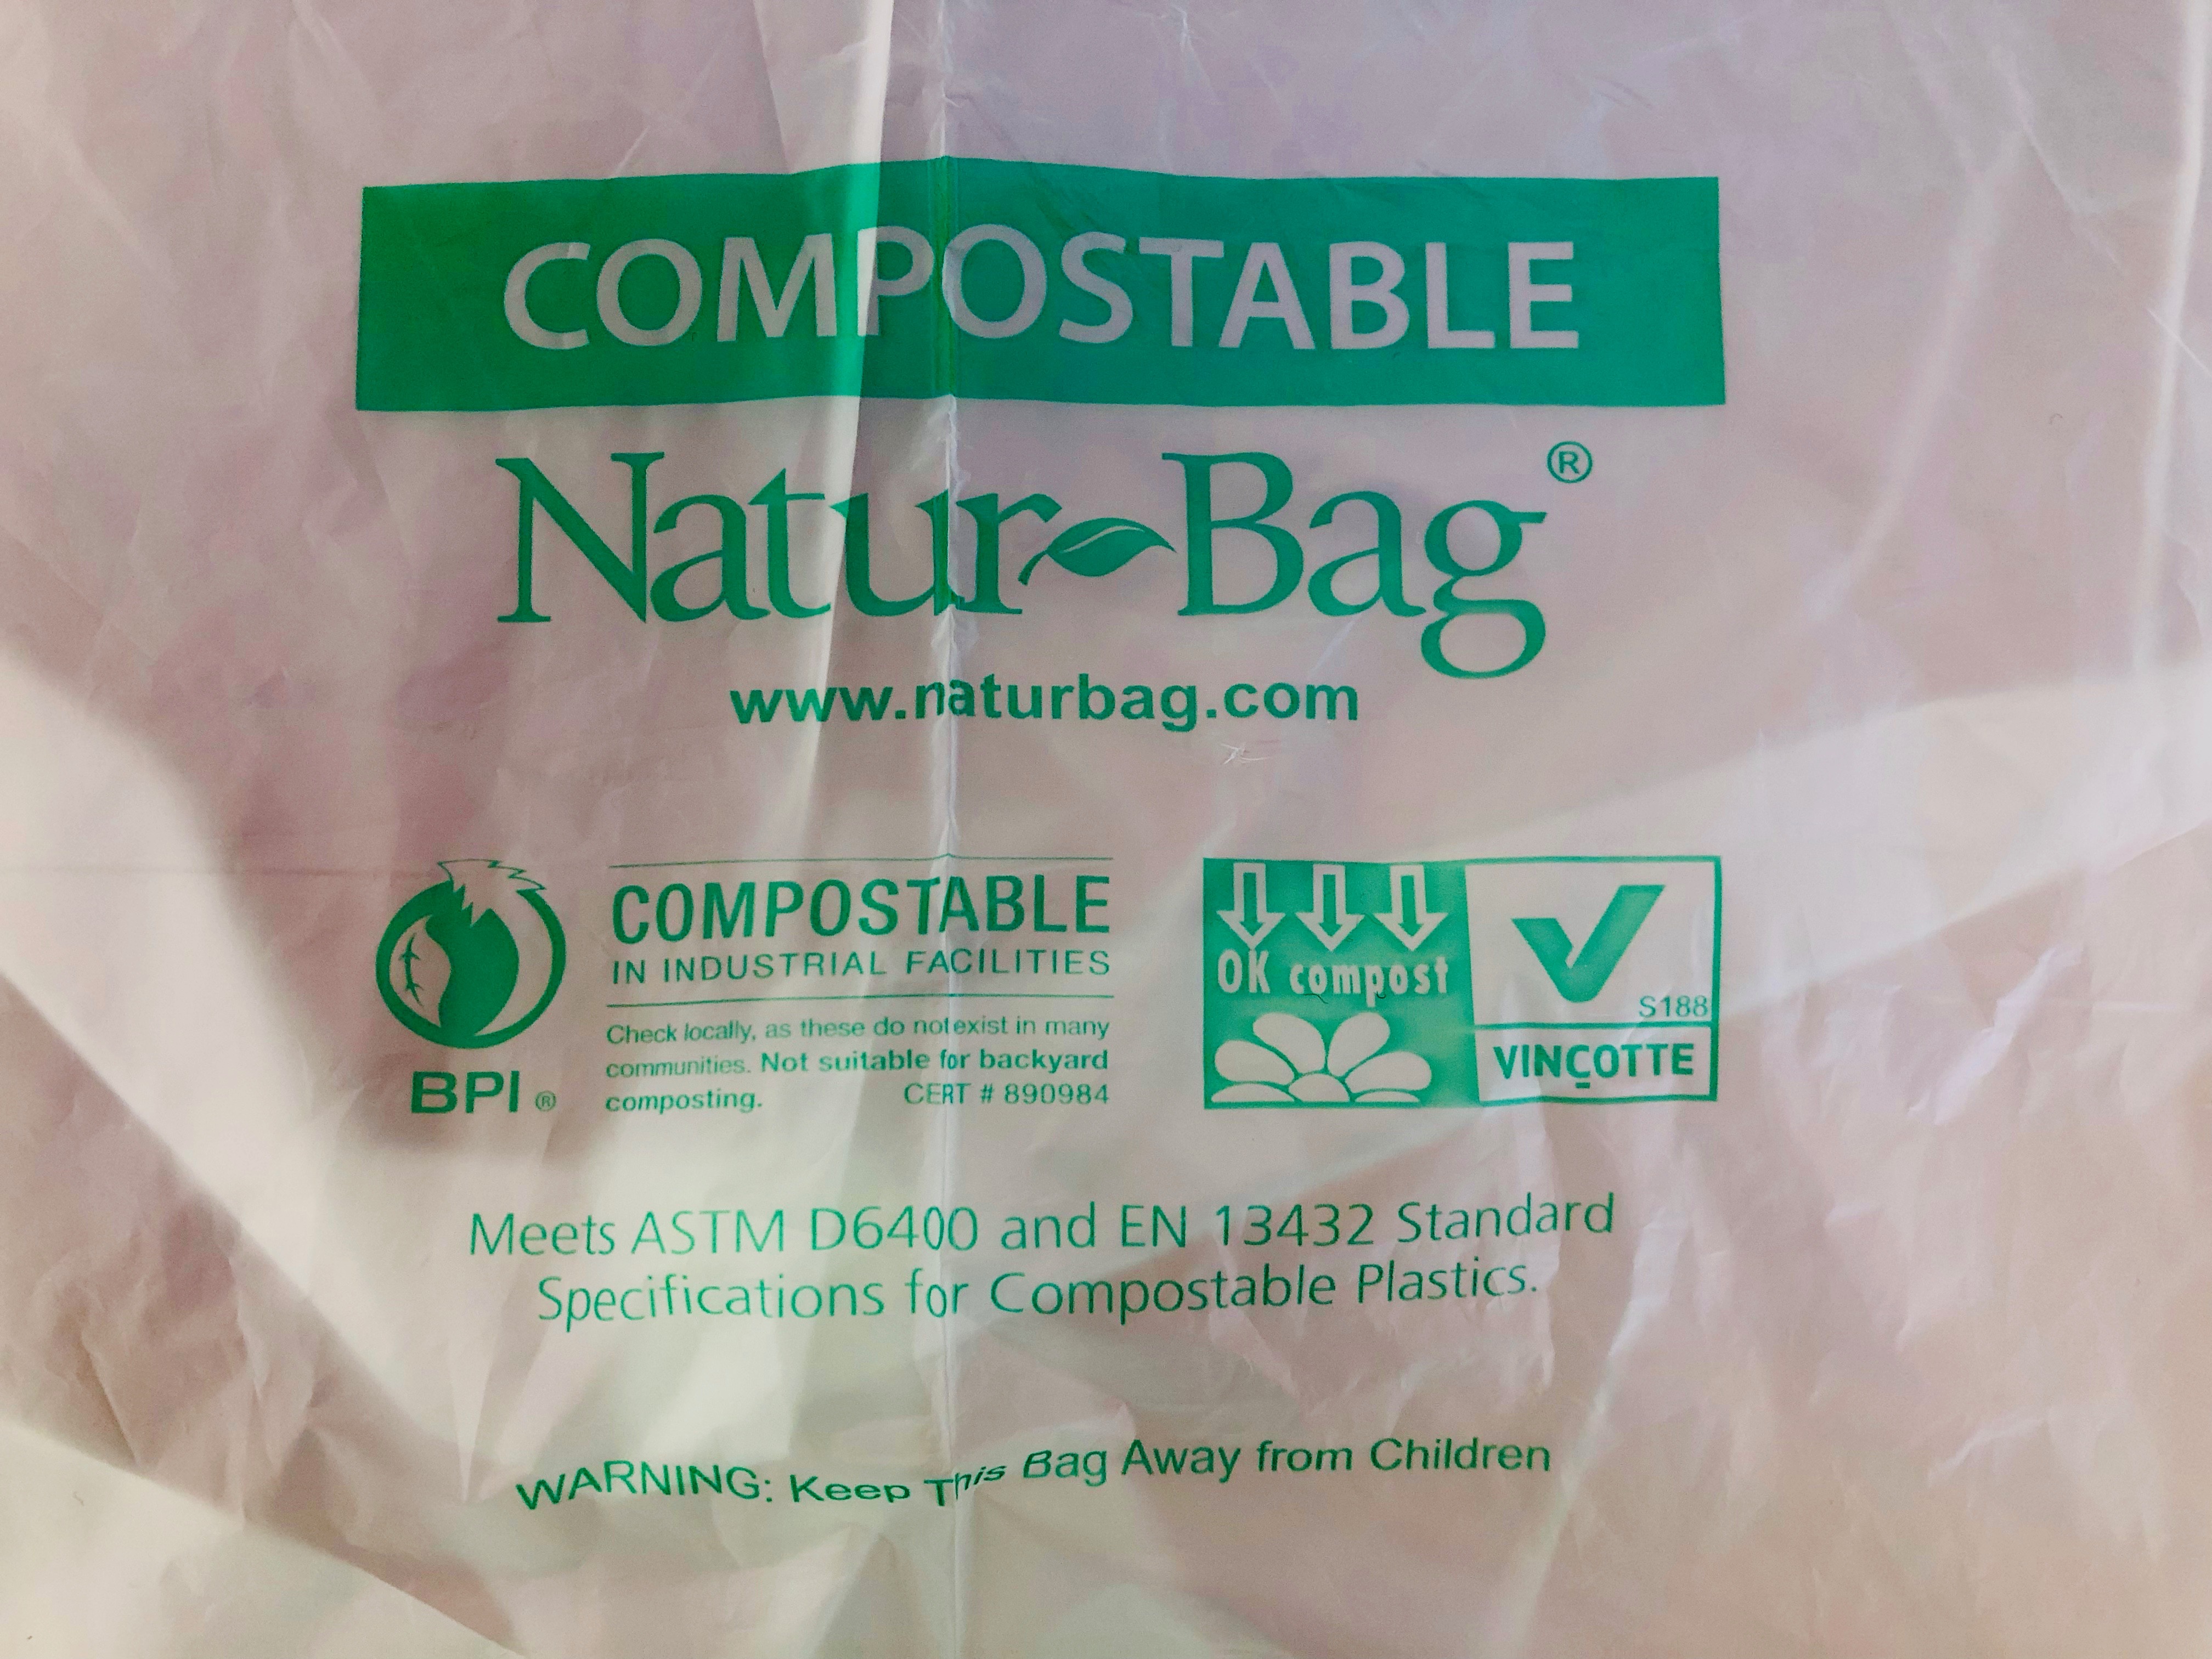 Compostable bags are only compostable under the right conditions.